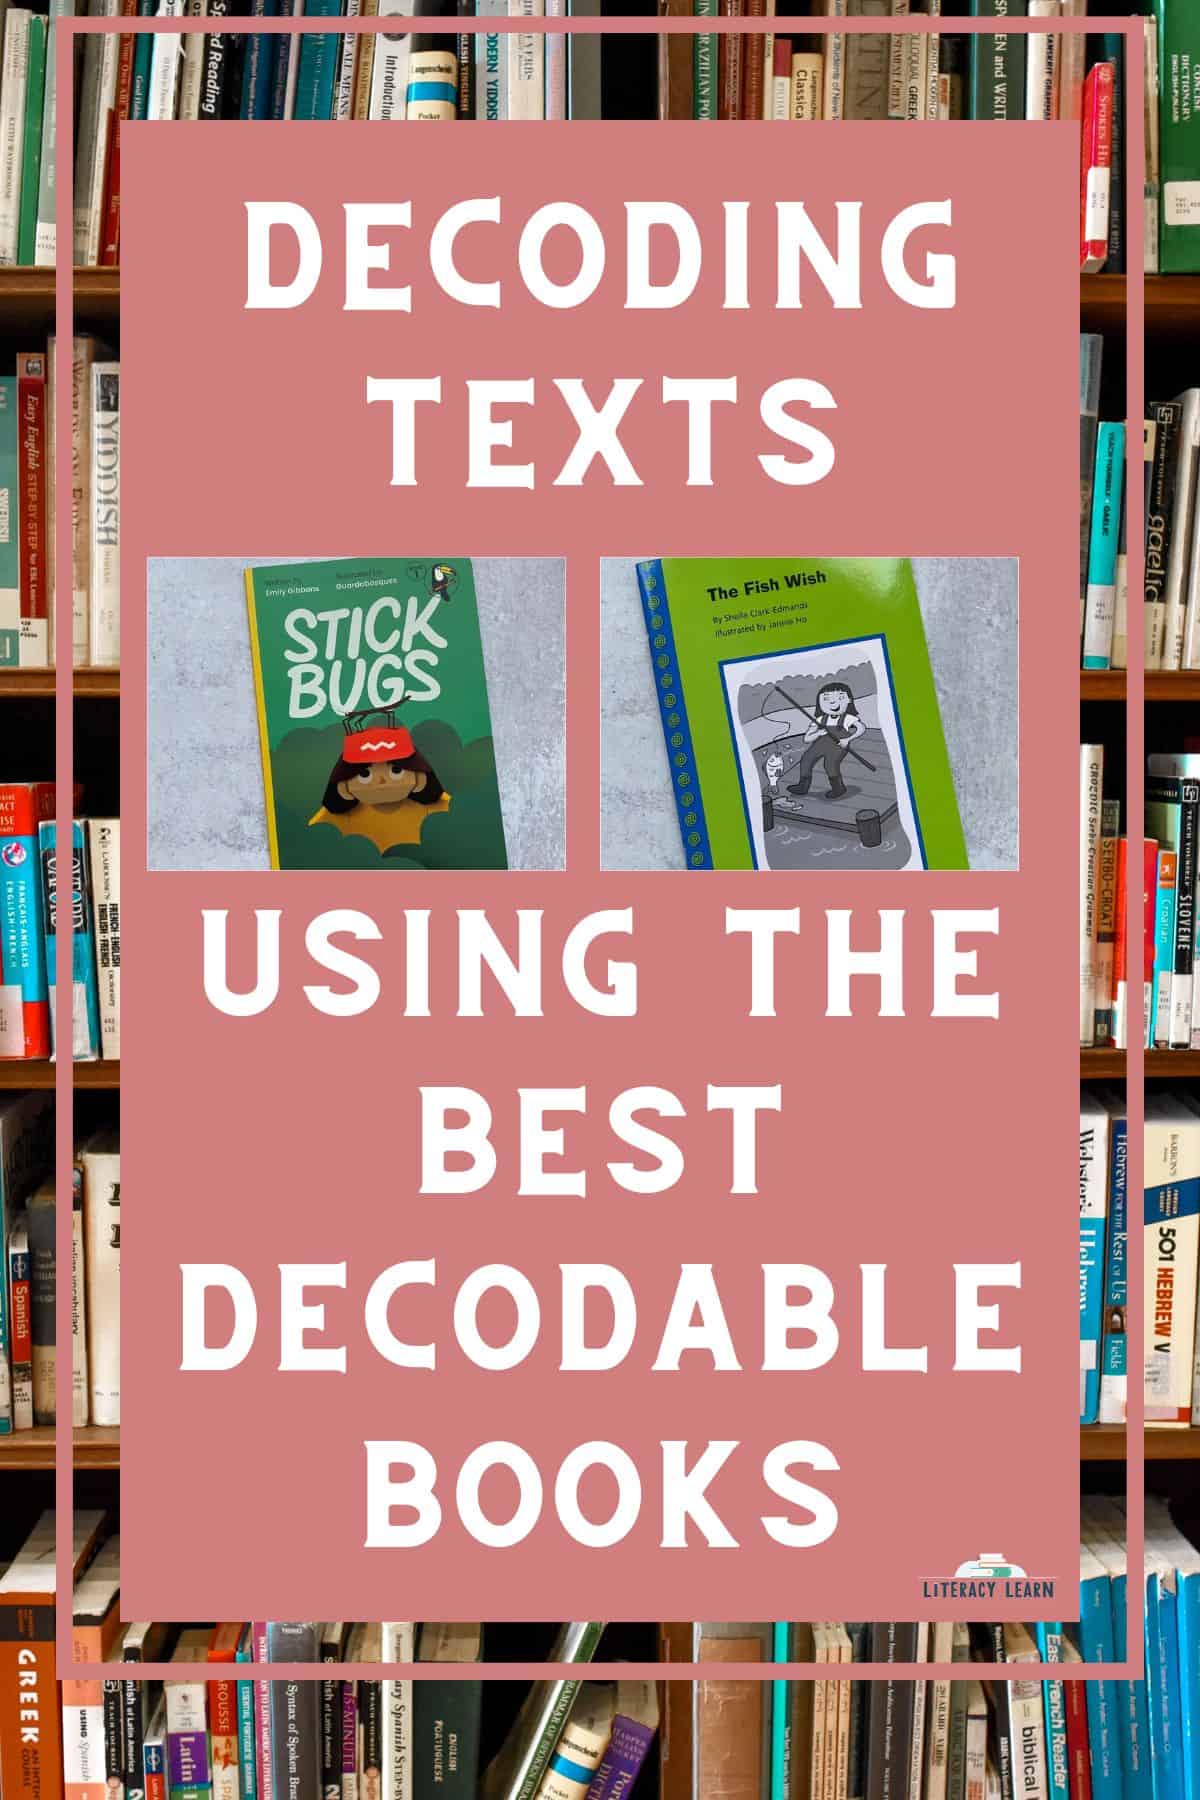 Photograph of shelved library books and decodable books with text "Decoding Texts."